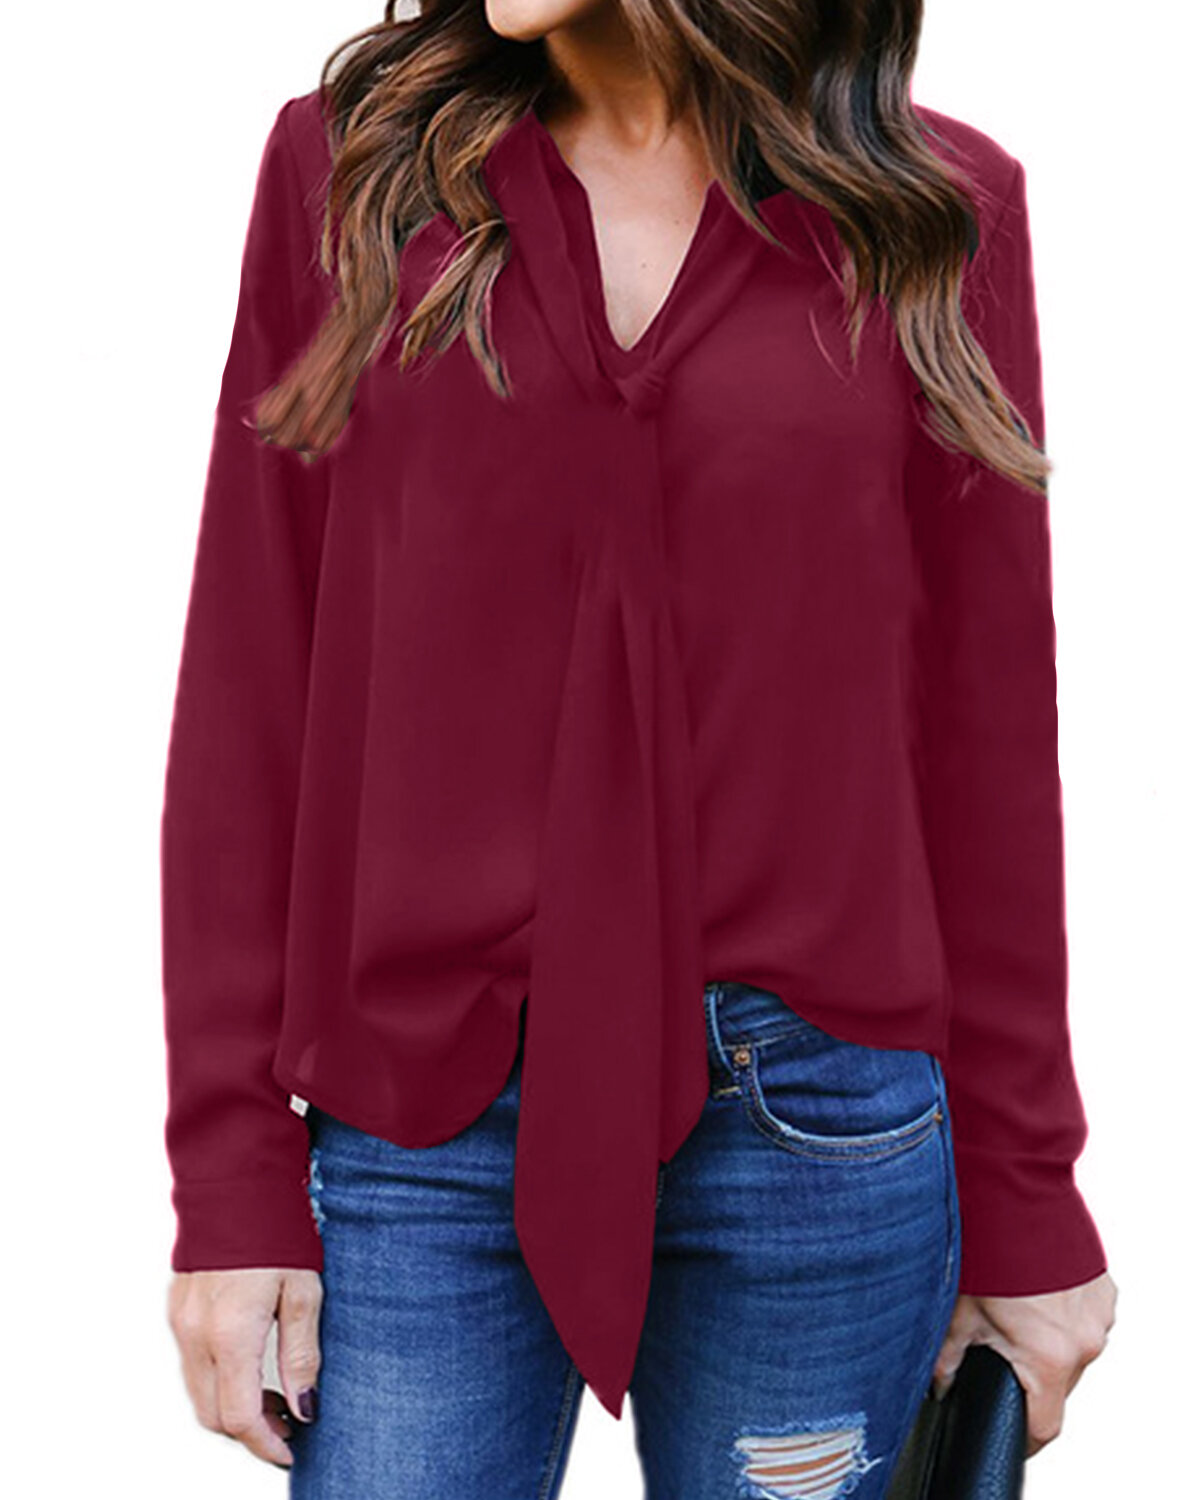 Chiffon Long Sleeve V Neck Loose Solid Causal Blouse For Women